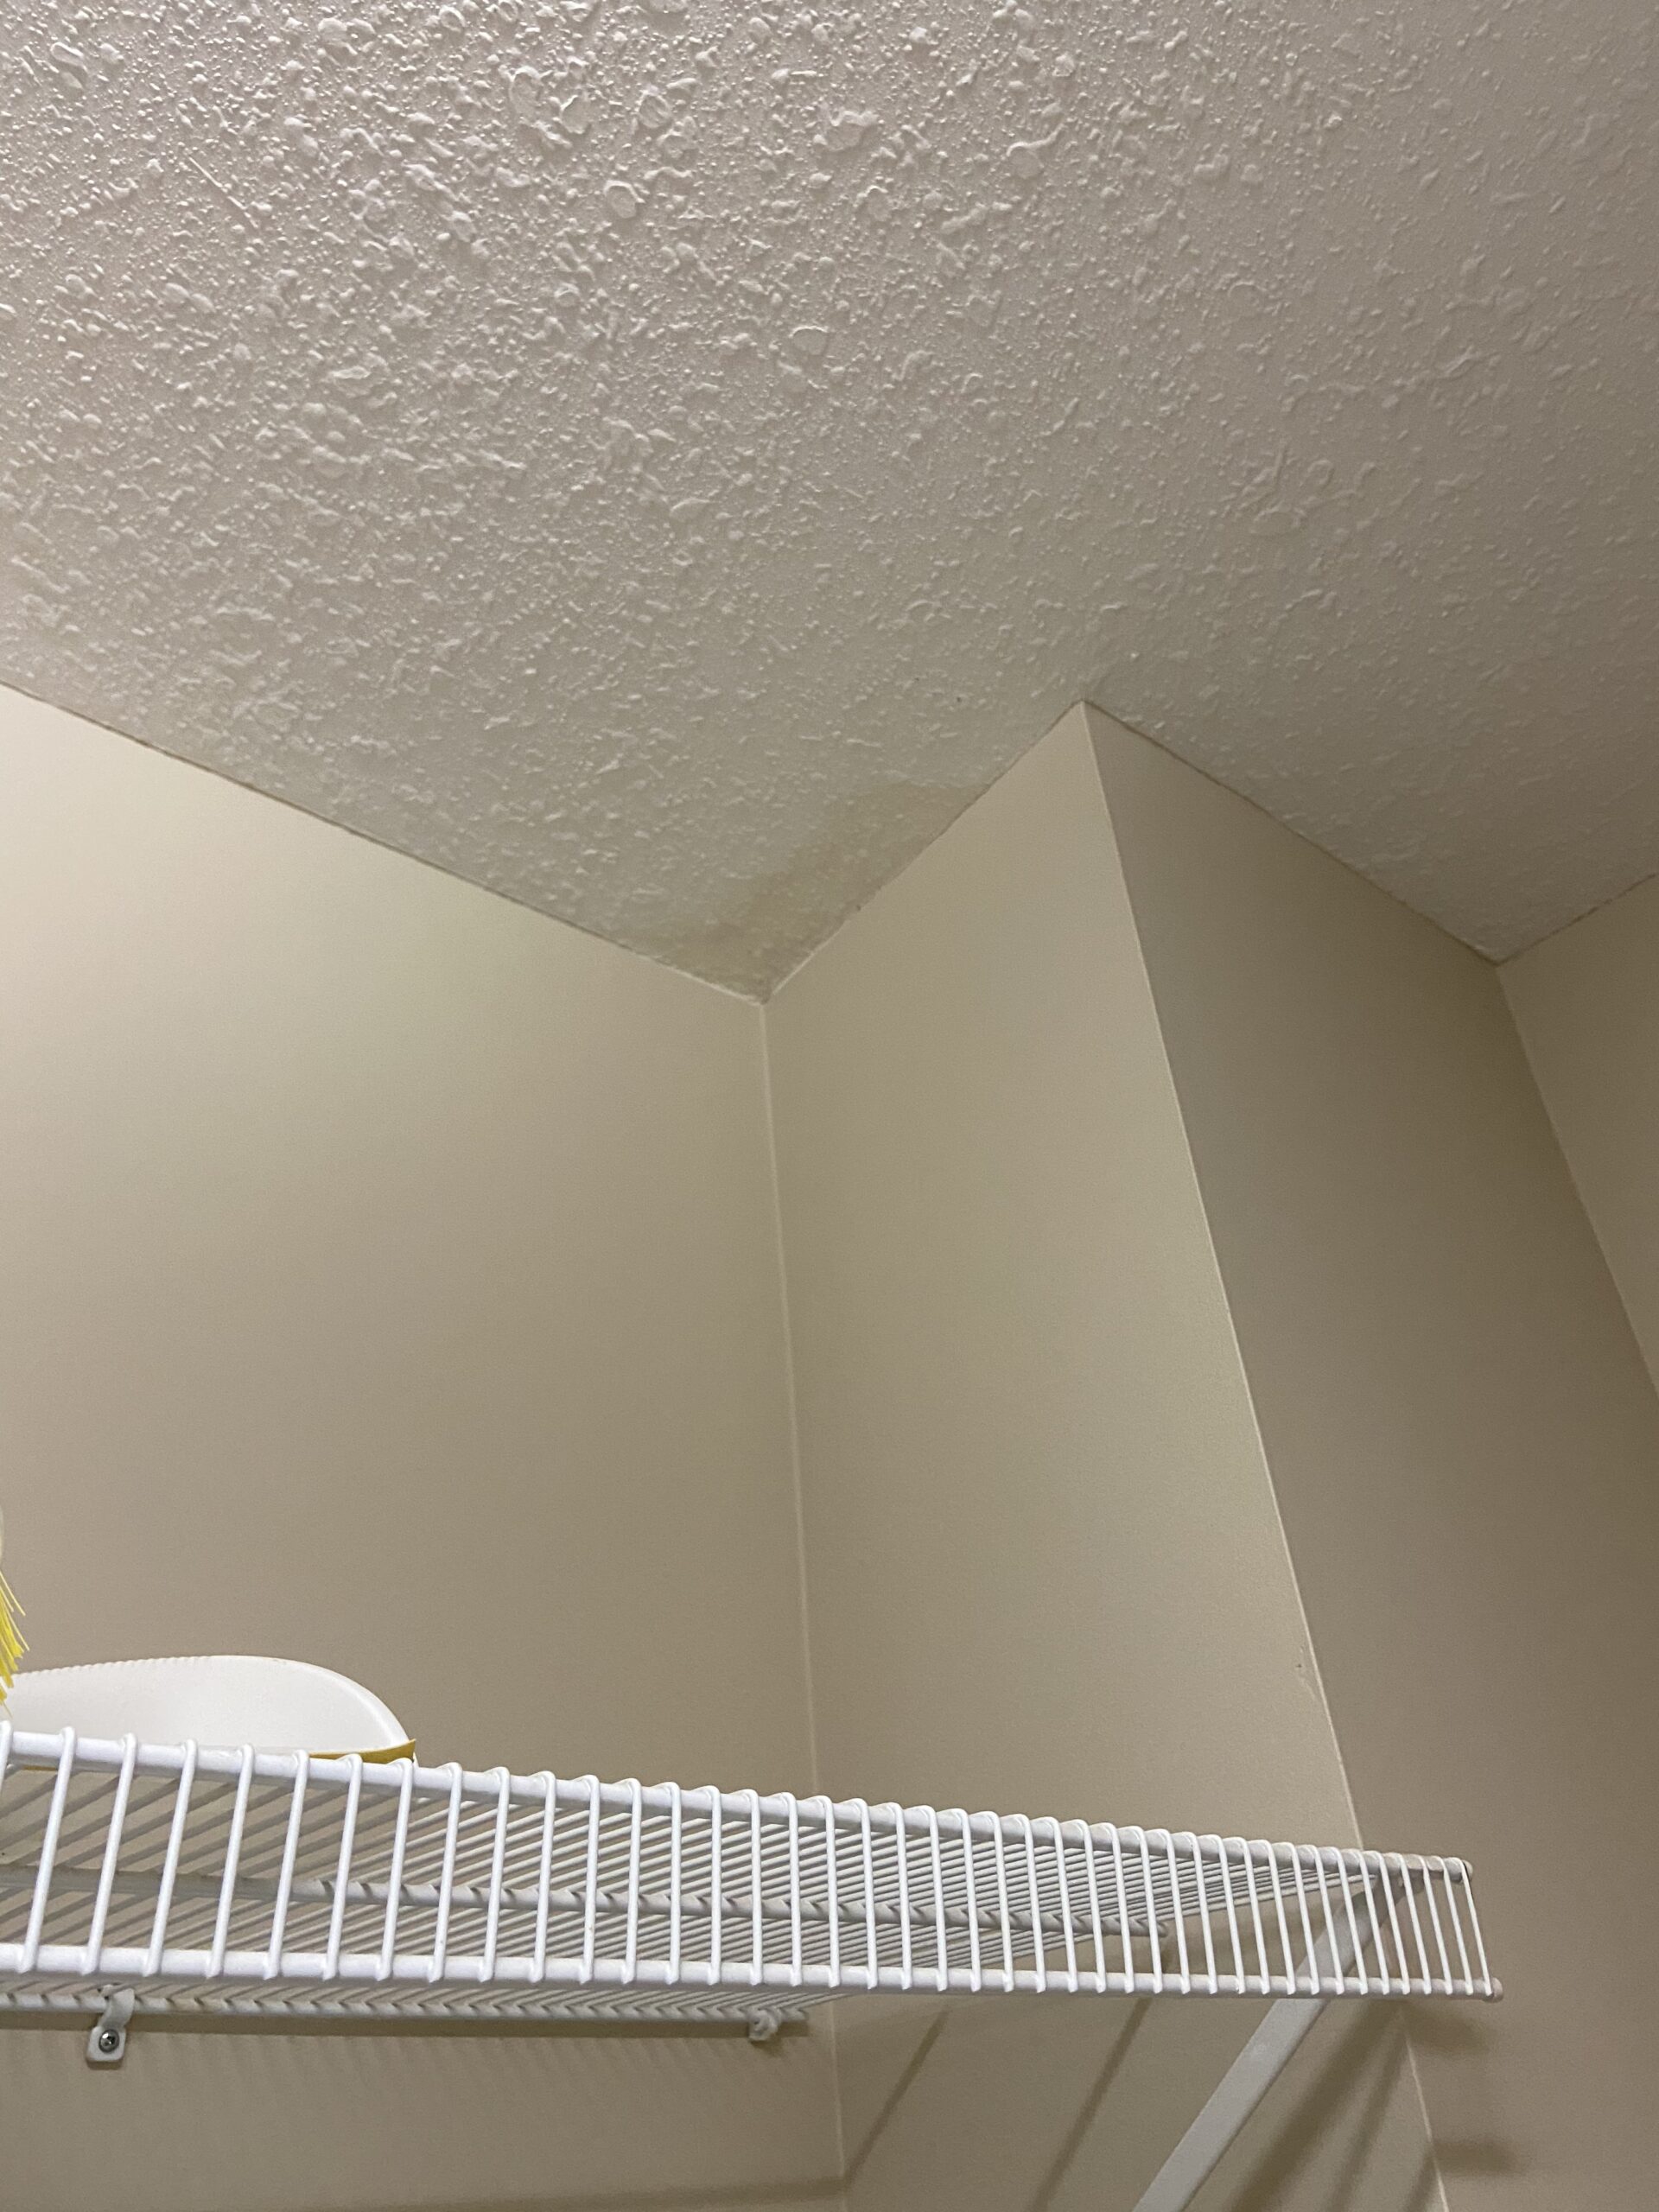 This is a picture of standing drywall where there is a roof leak